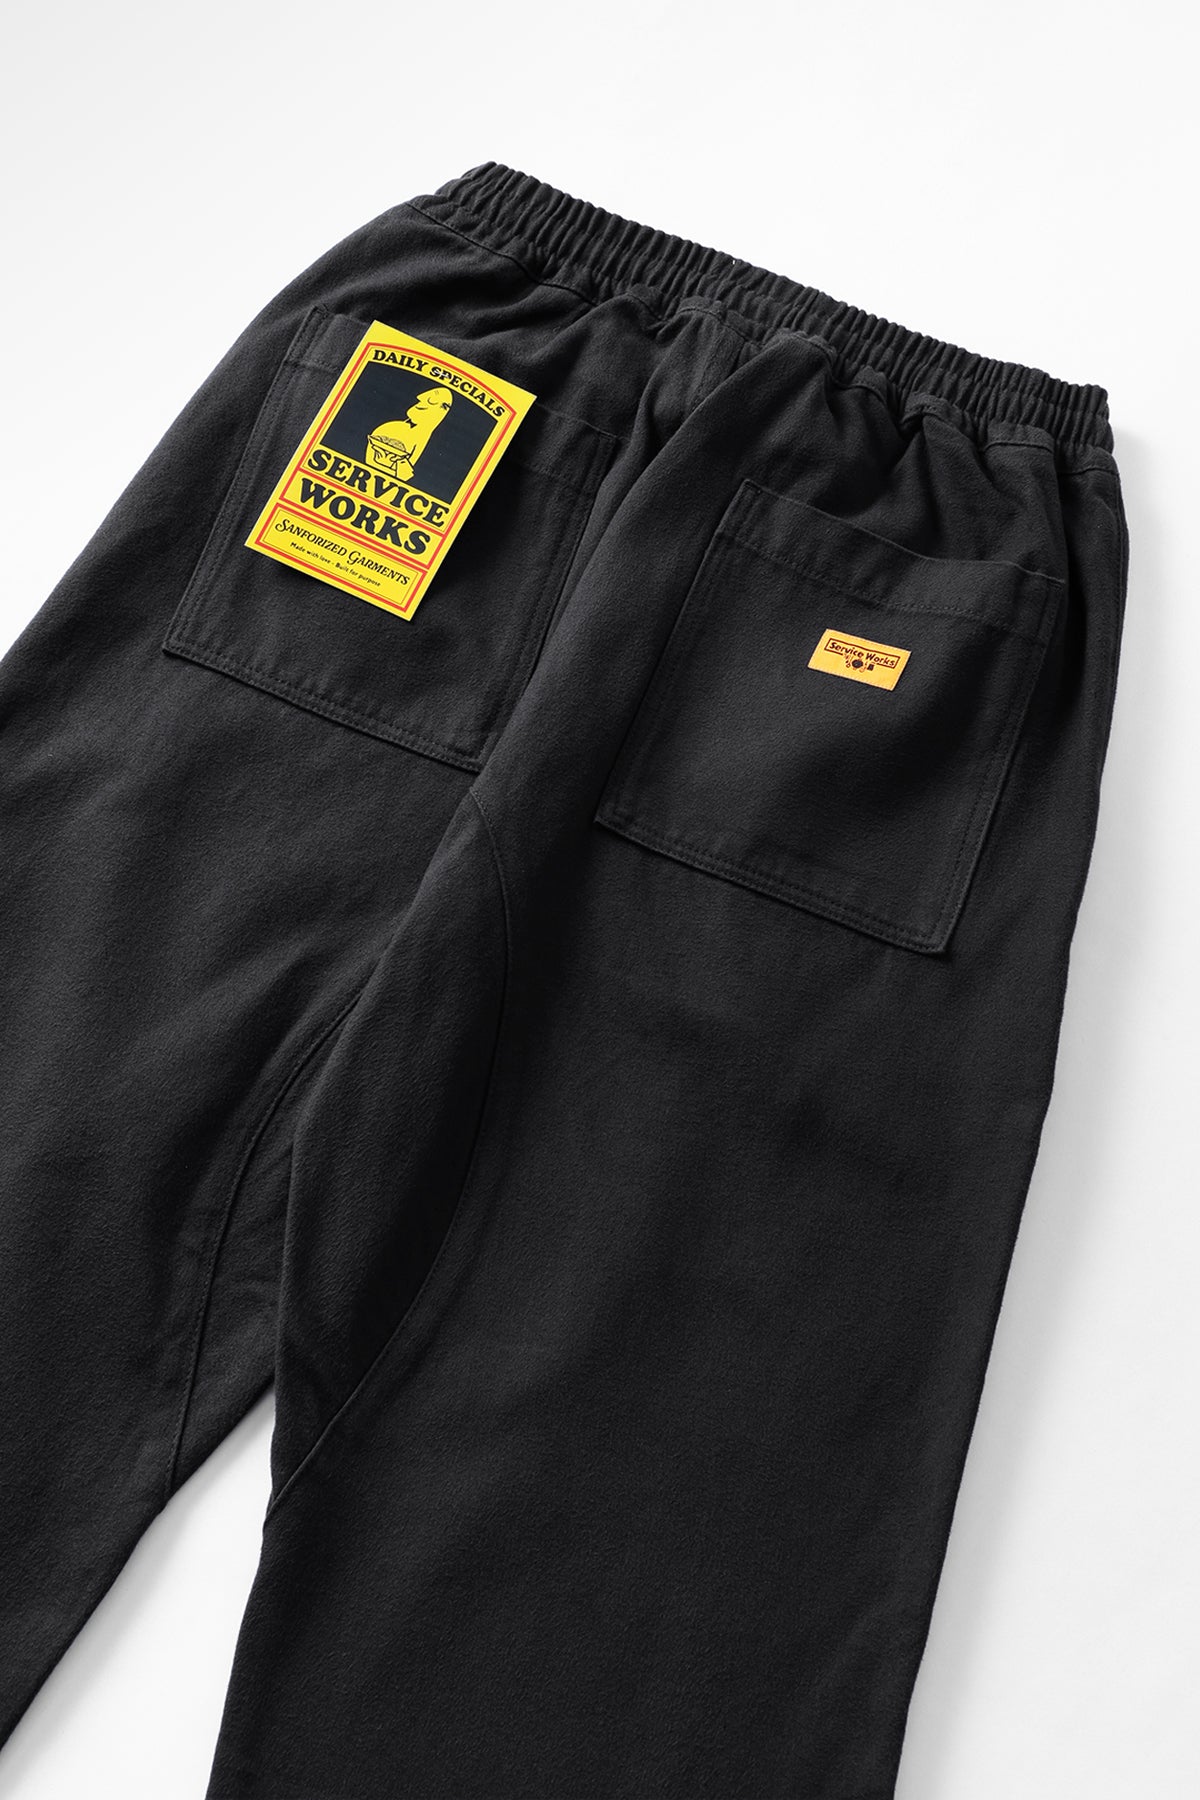 German Army Moleskin Trousers Olive - Free Delivery | Military Kit